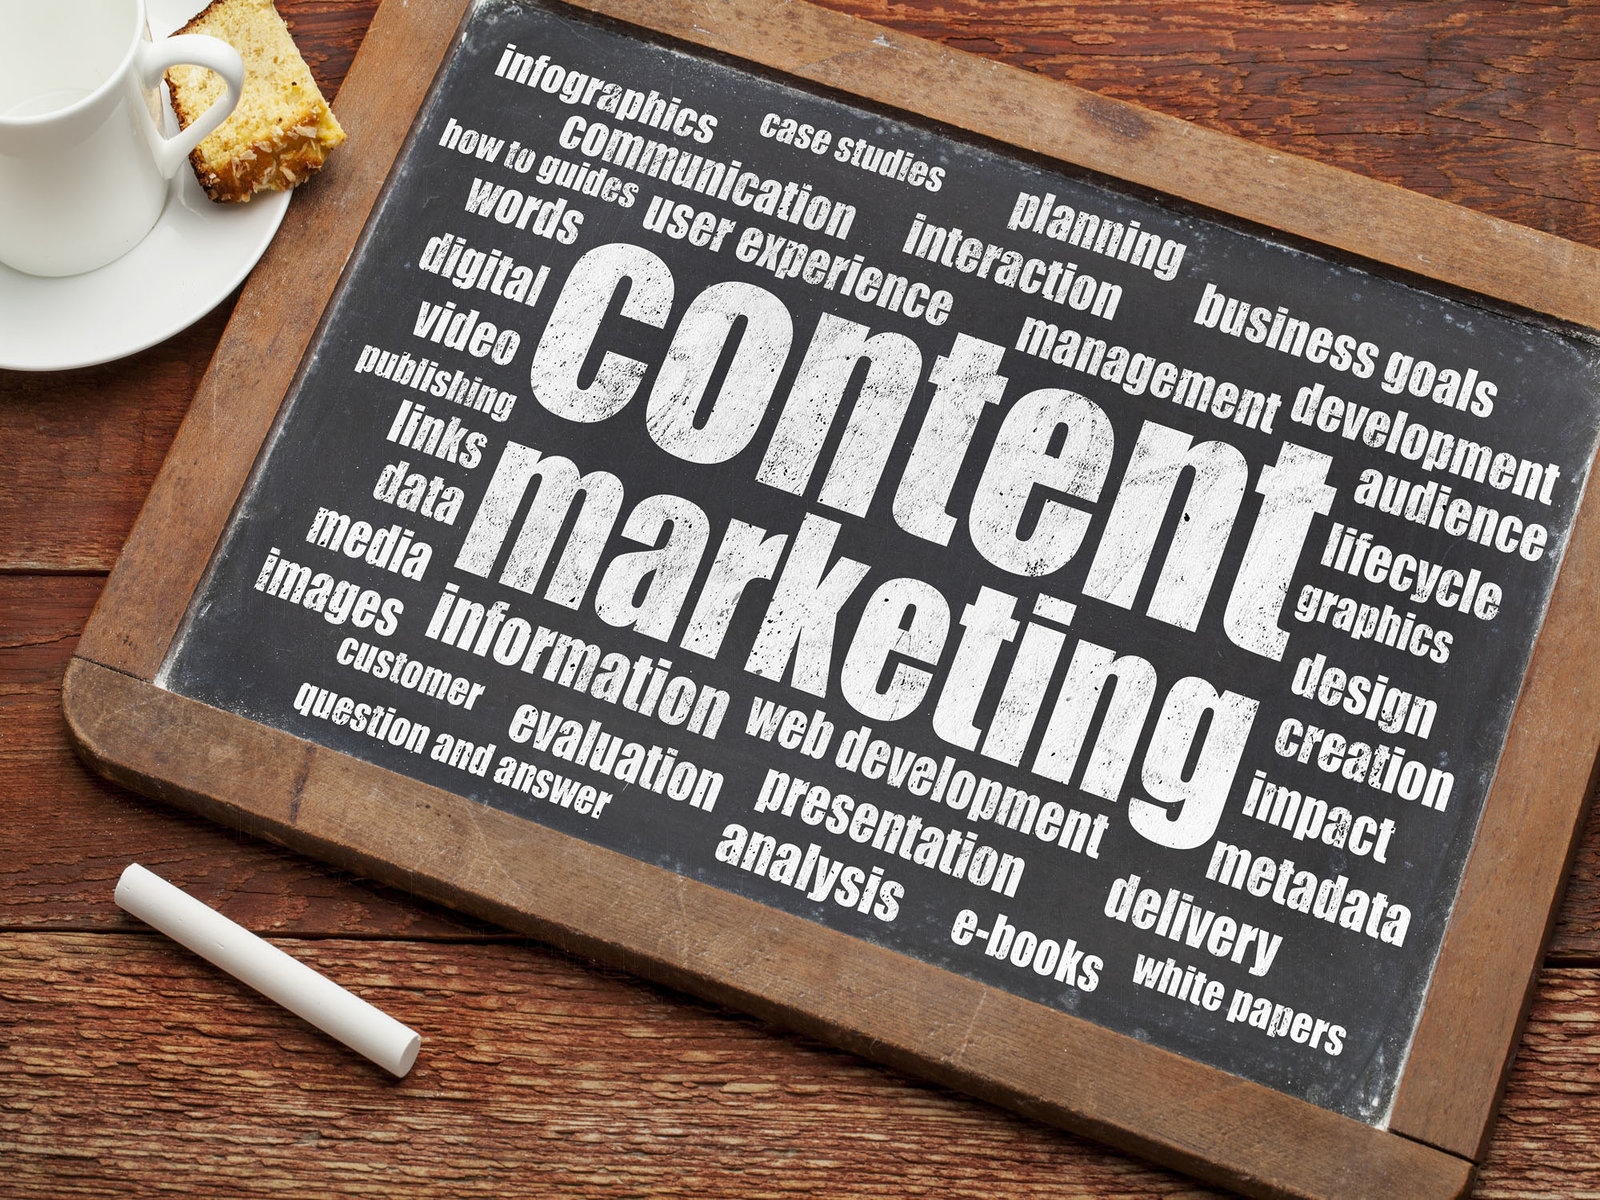 What Should Your Higher Education Marketing Agency Do Regarding Your Content?